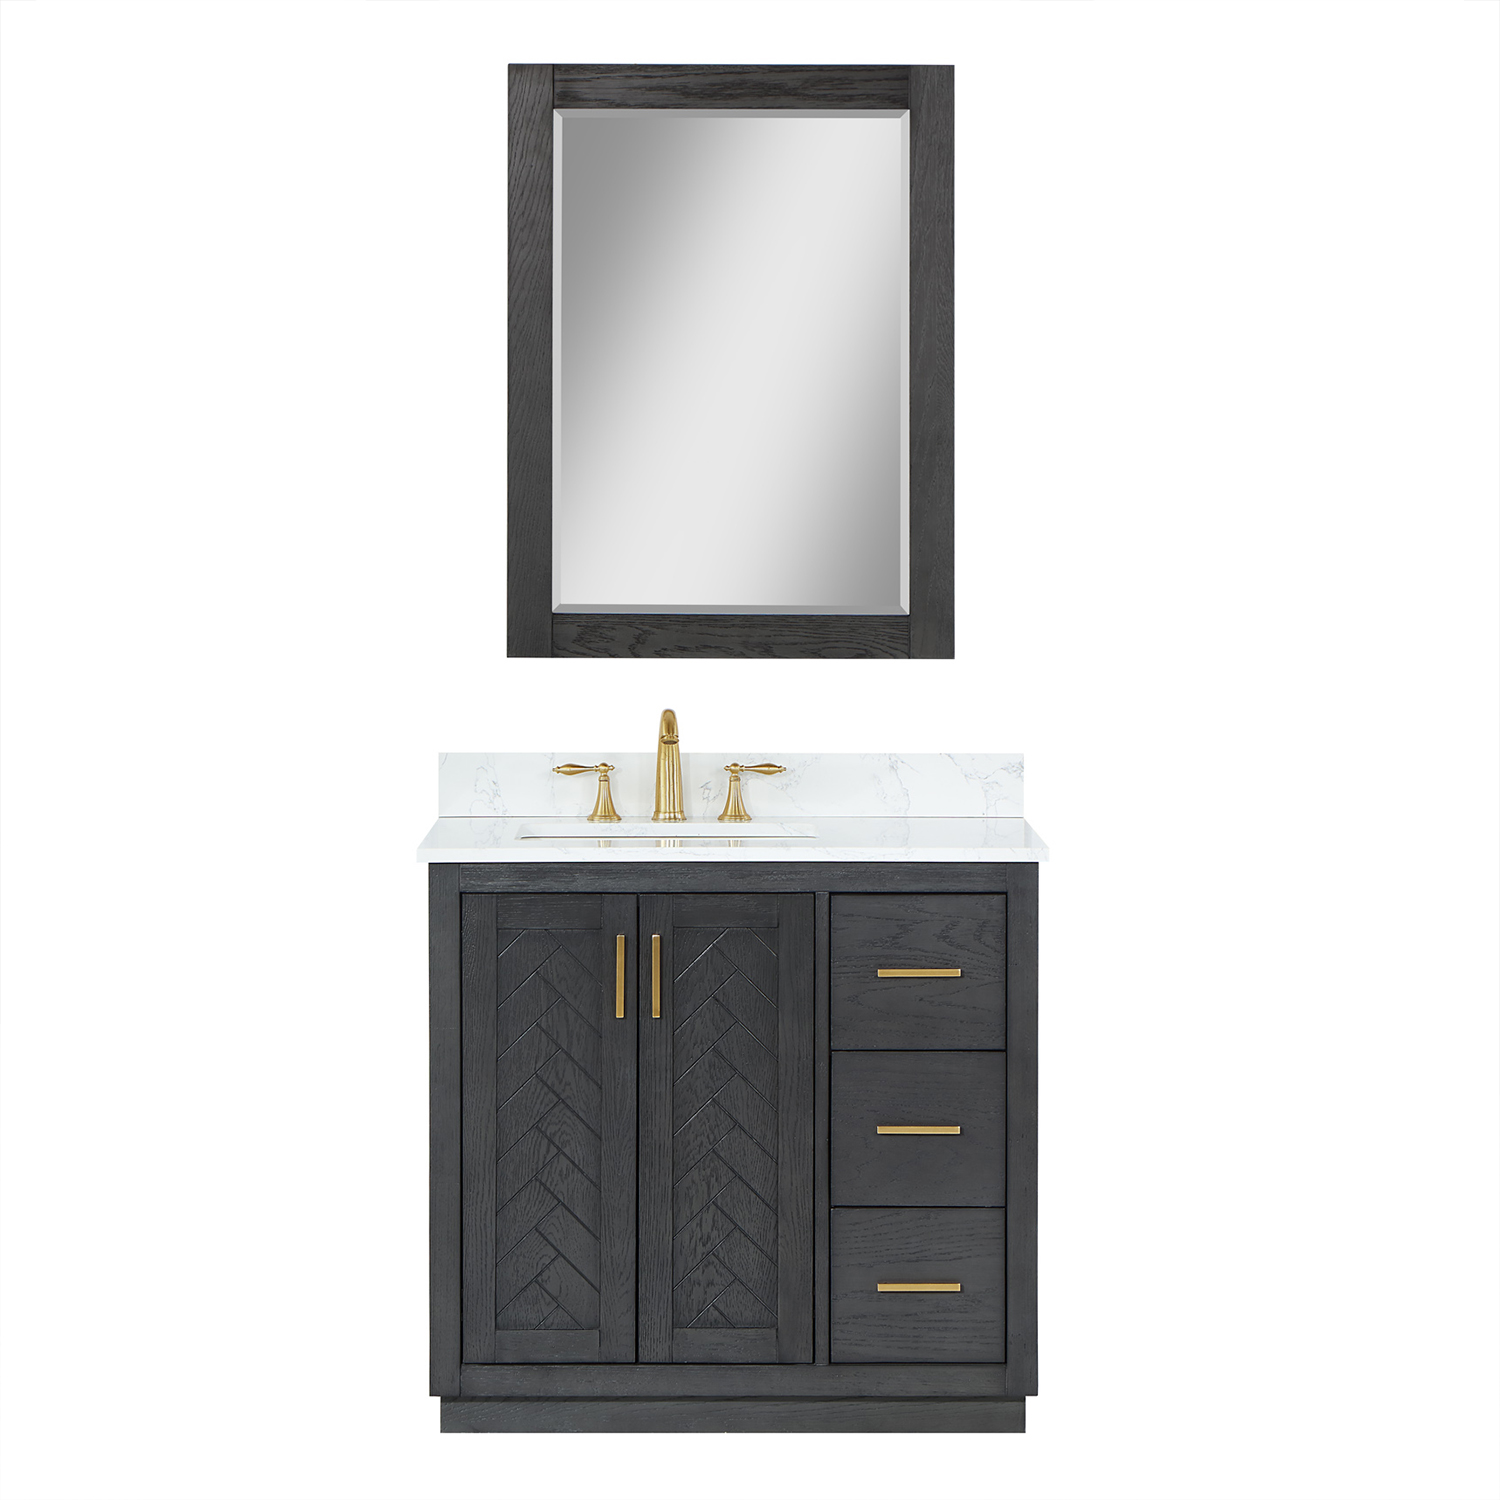 Issac Edwards Collection 36" Single Bathroom Vanity Set in Brown Oak with Grain White Composite Stone Countertop without Mirror 